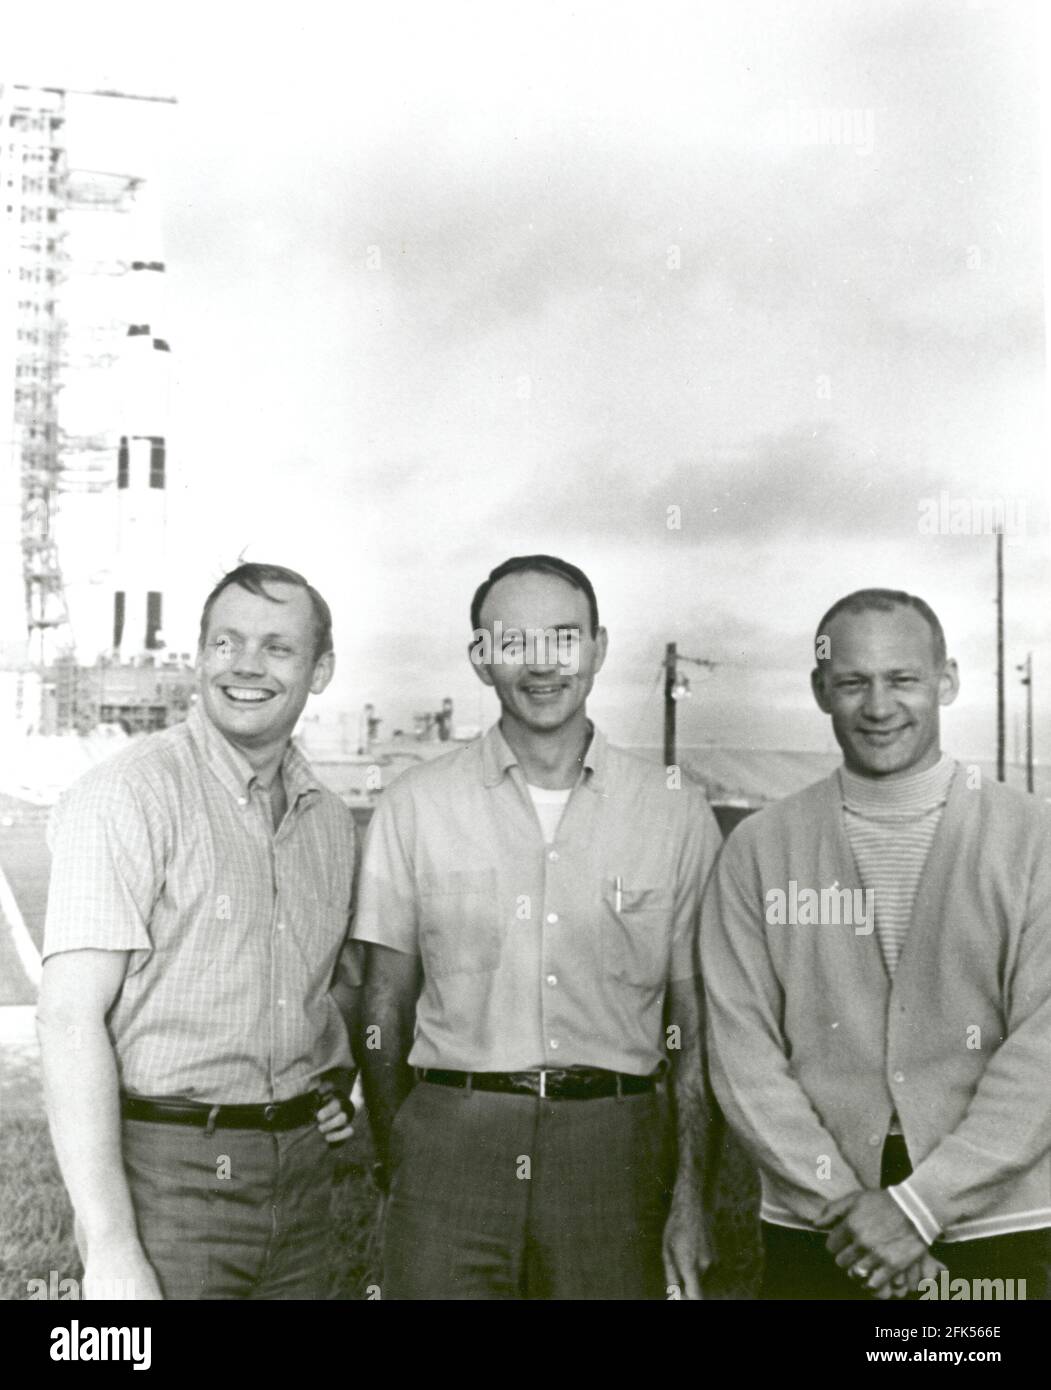 Cape Canaveral, FL - (FILE) -- On May 20, 1969, the National Aeronautics and Space Administration's (NASA) Apollo 11 flight crew, Neil A. Armstrong, commander, left; Michael Collins, command module pilot, center; and Buzz Aldrin, lunar module pilot, right, stand near the Apollo/Saturn V space vehicle that would eventually carry them into space on July 16,1969.Credit: NASA via CNP /MediaPunch Stock Photo